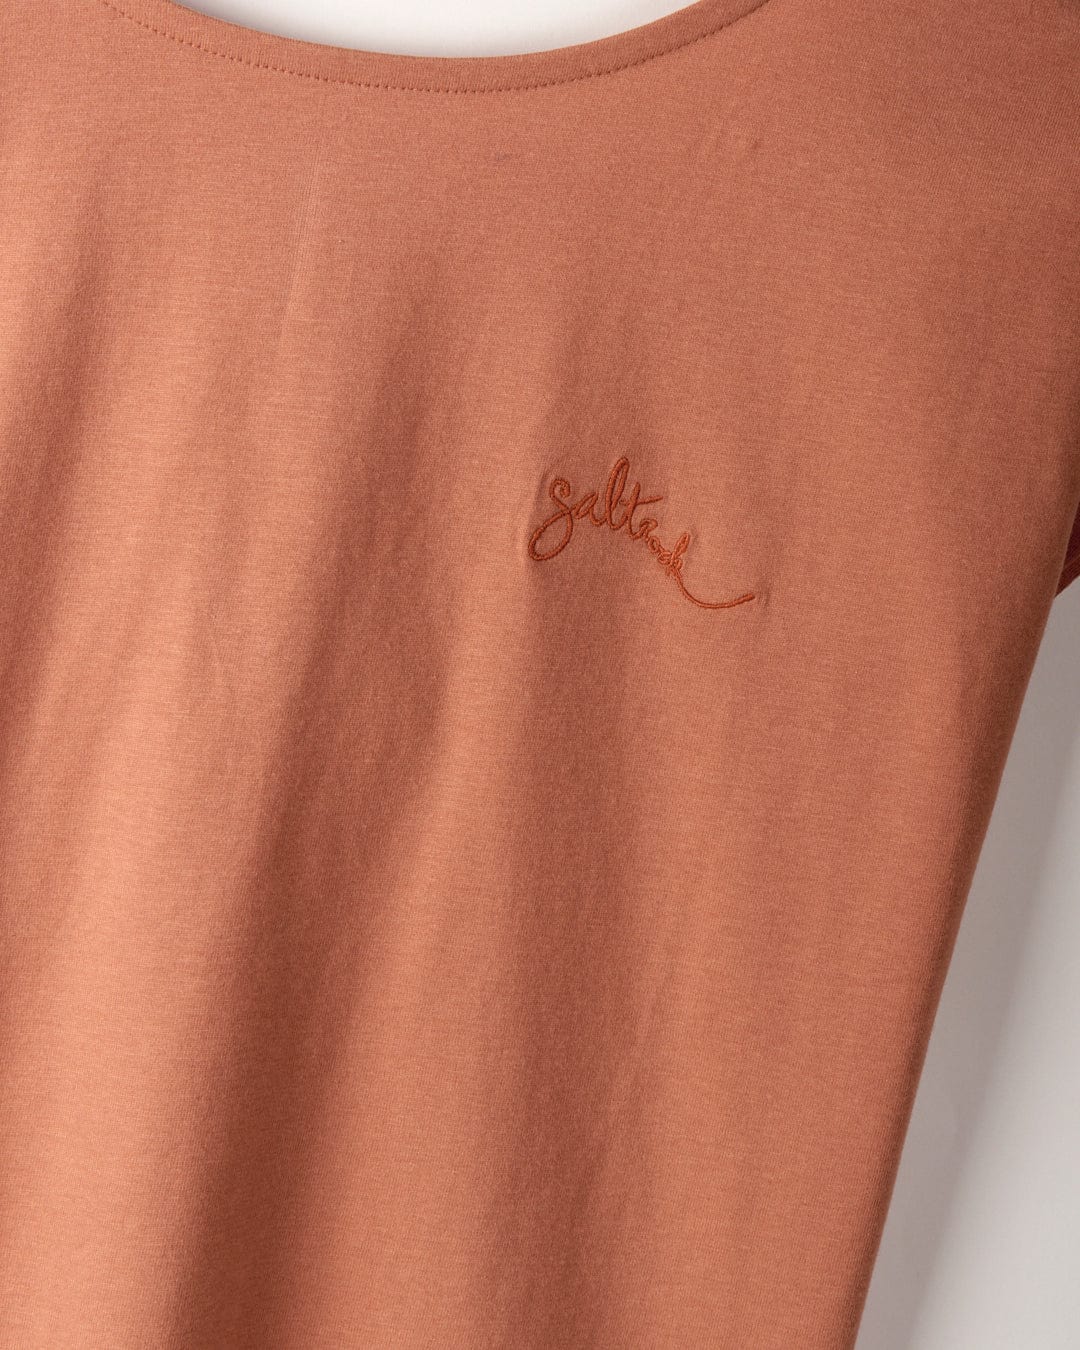 Close-up of a rust-colored, 100% cotton t-shirt with the word "Saltrock" embroidered on the chest in a cursive font and dropped back detail.